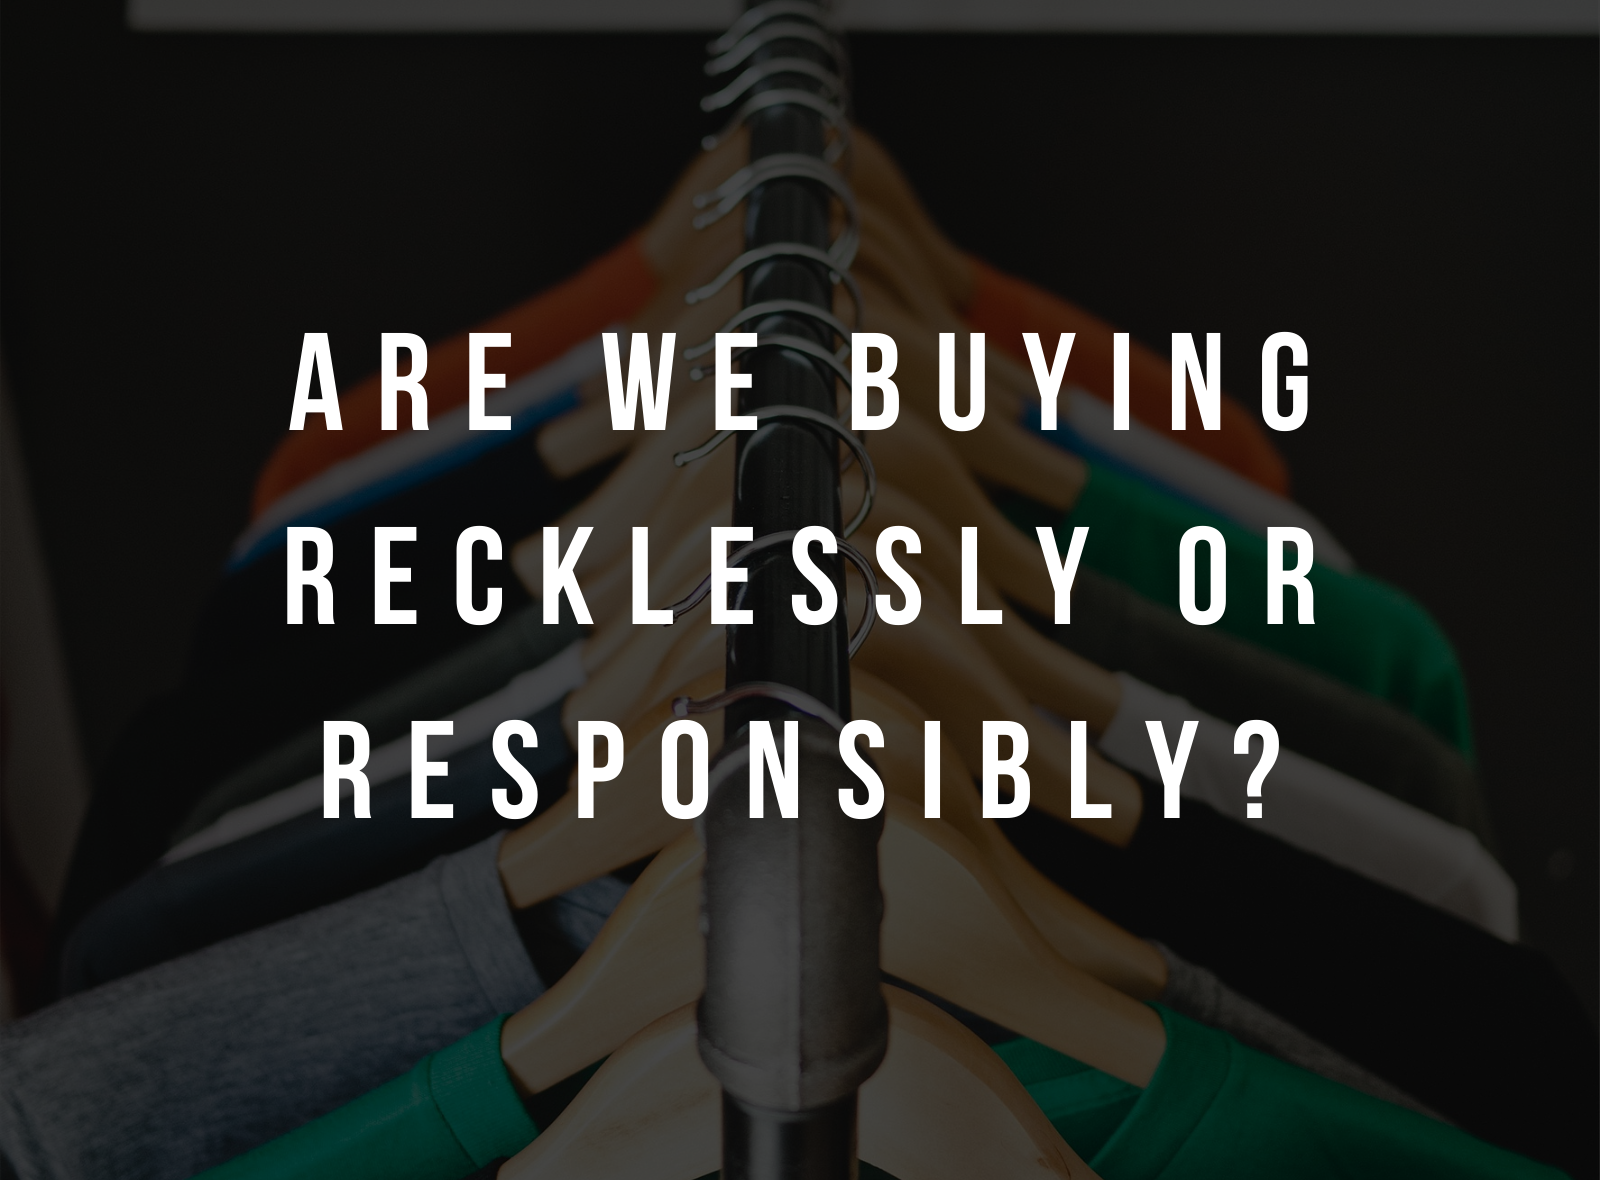 ARE WE BUYING RESPONSIBLY OR RECKLESSLY?